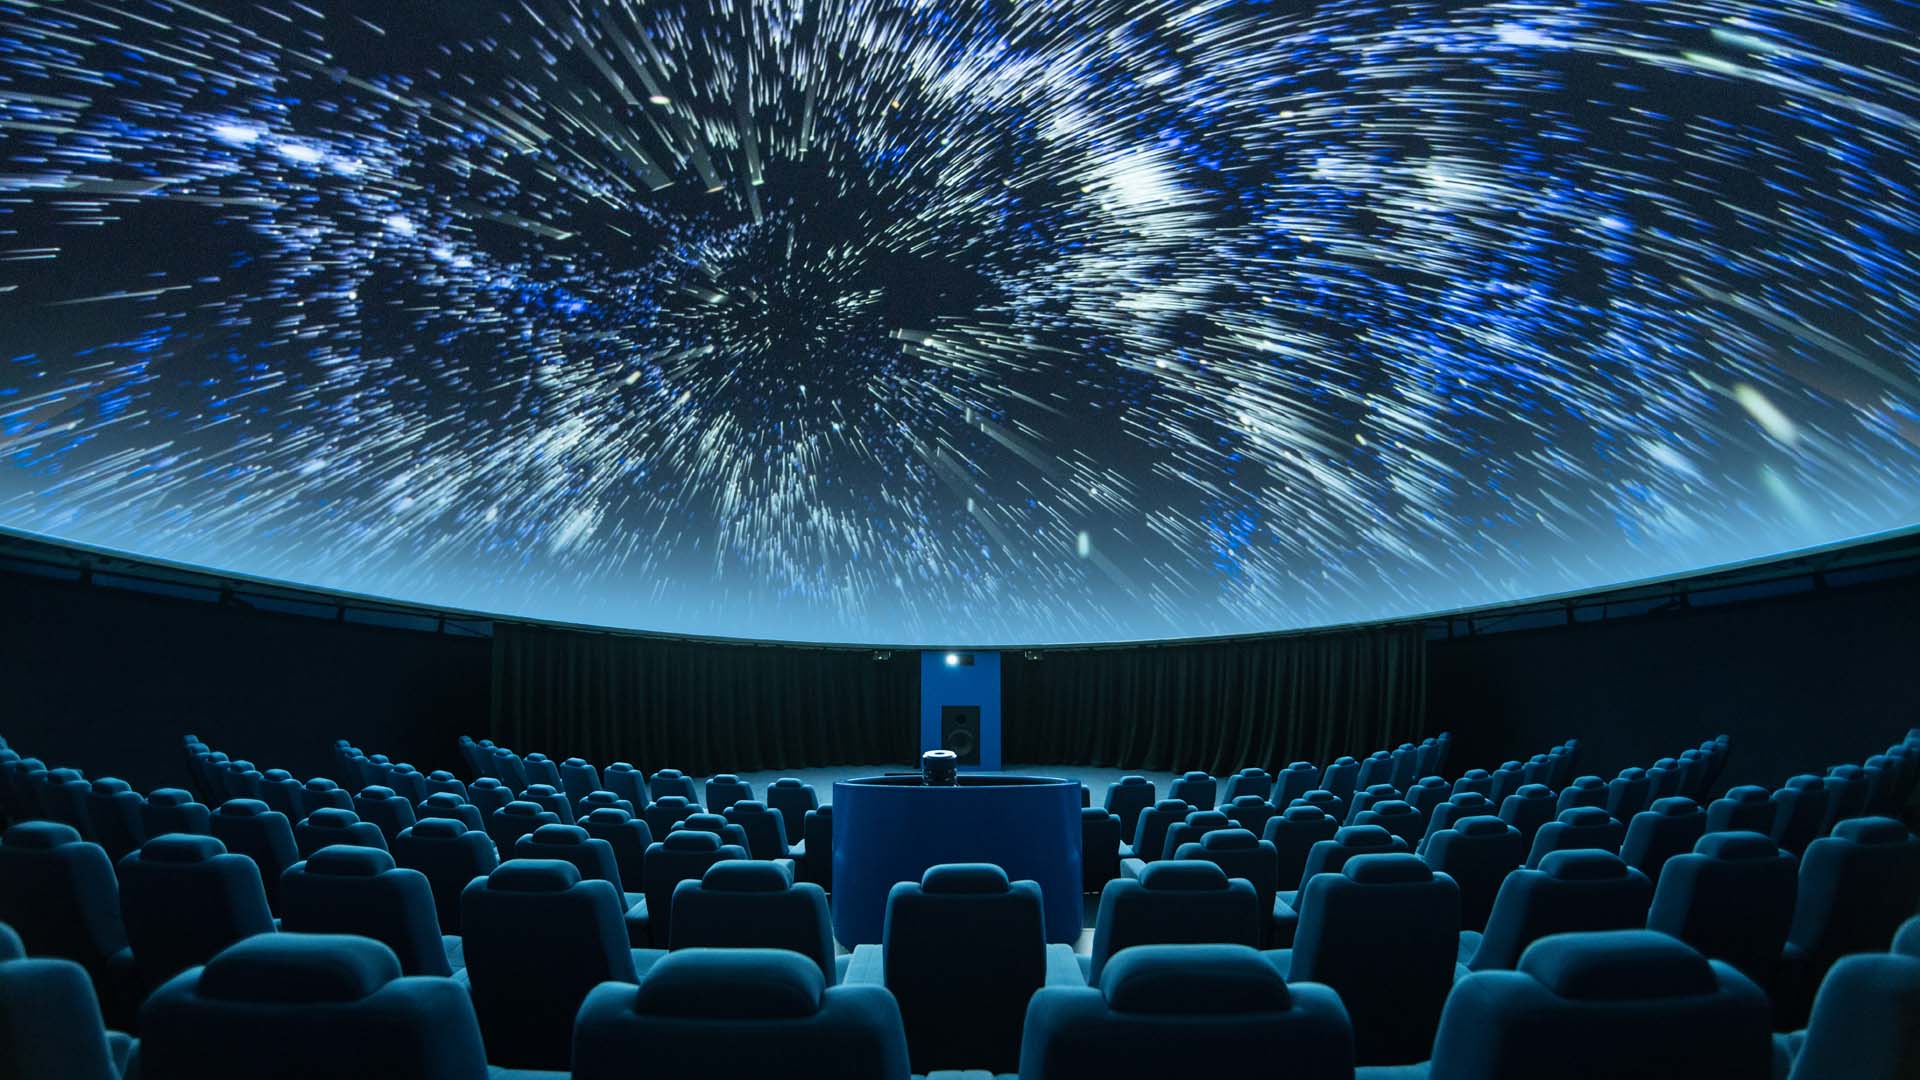 Just like in a planetarium, a night sky projector beams stars and meteors onto the ceiling. Pavel Gabzdyl/Shutterstock.com